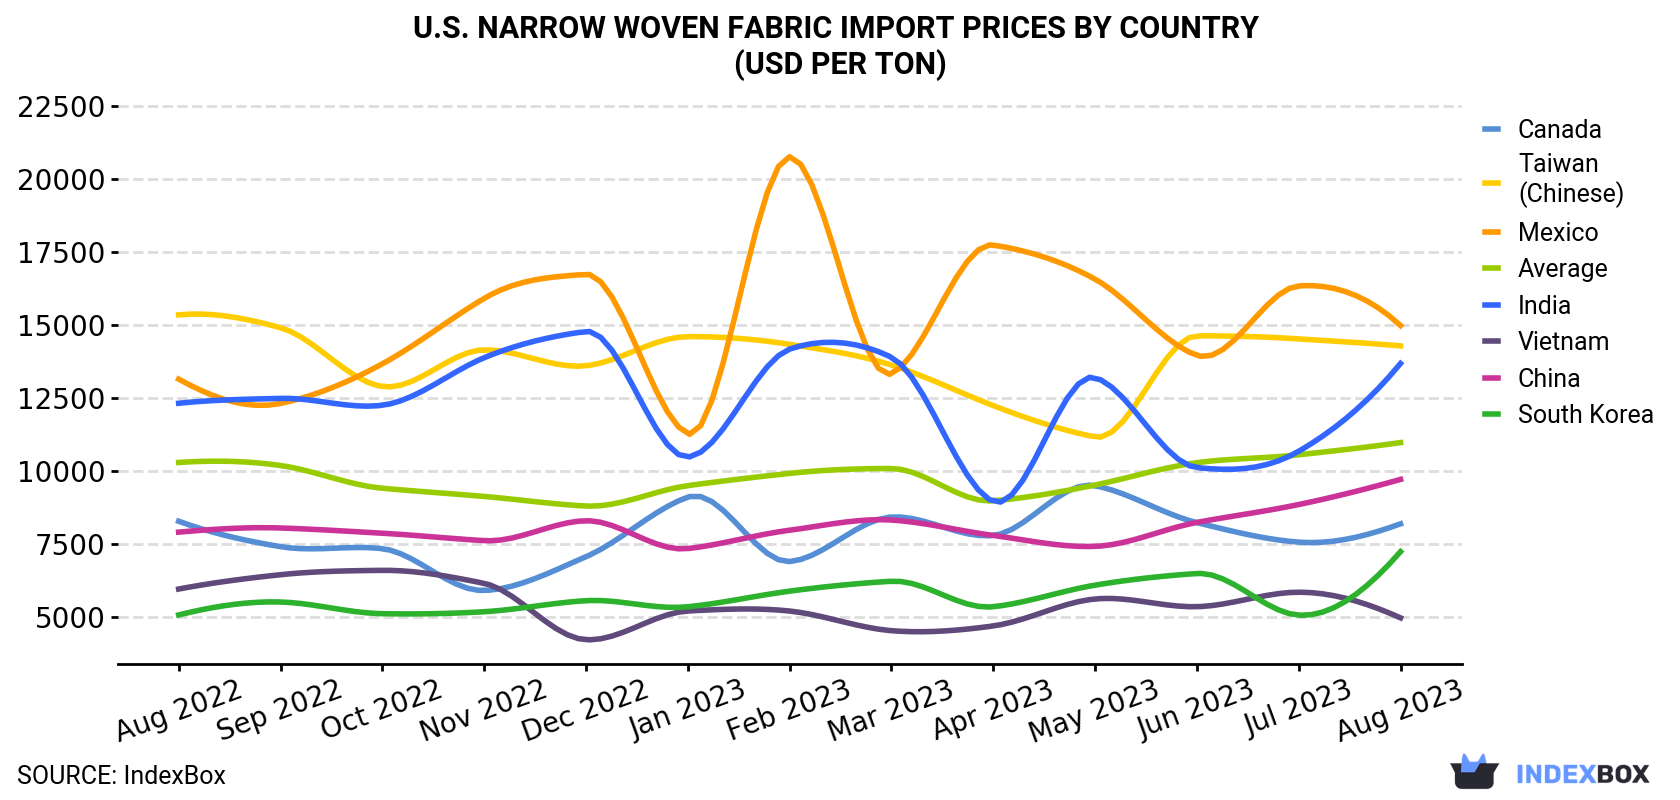 U.S. Narrow Woven Fabric Import Prices By Country (USD Per Ton)